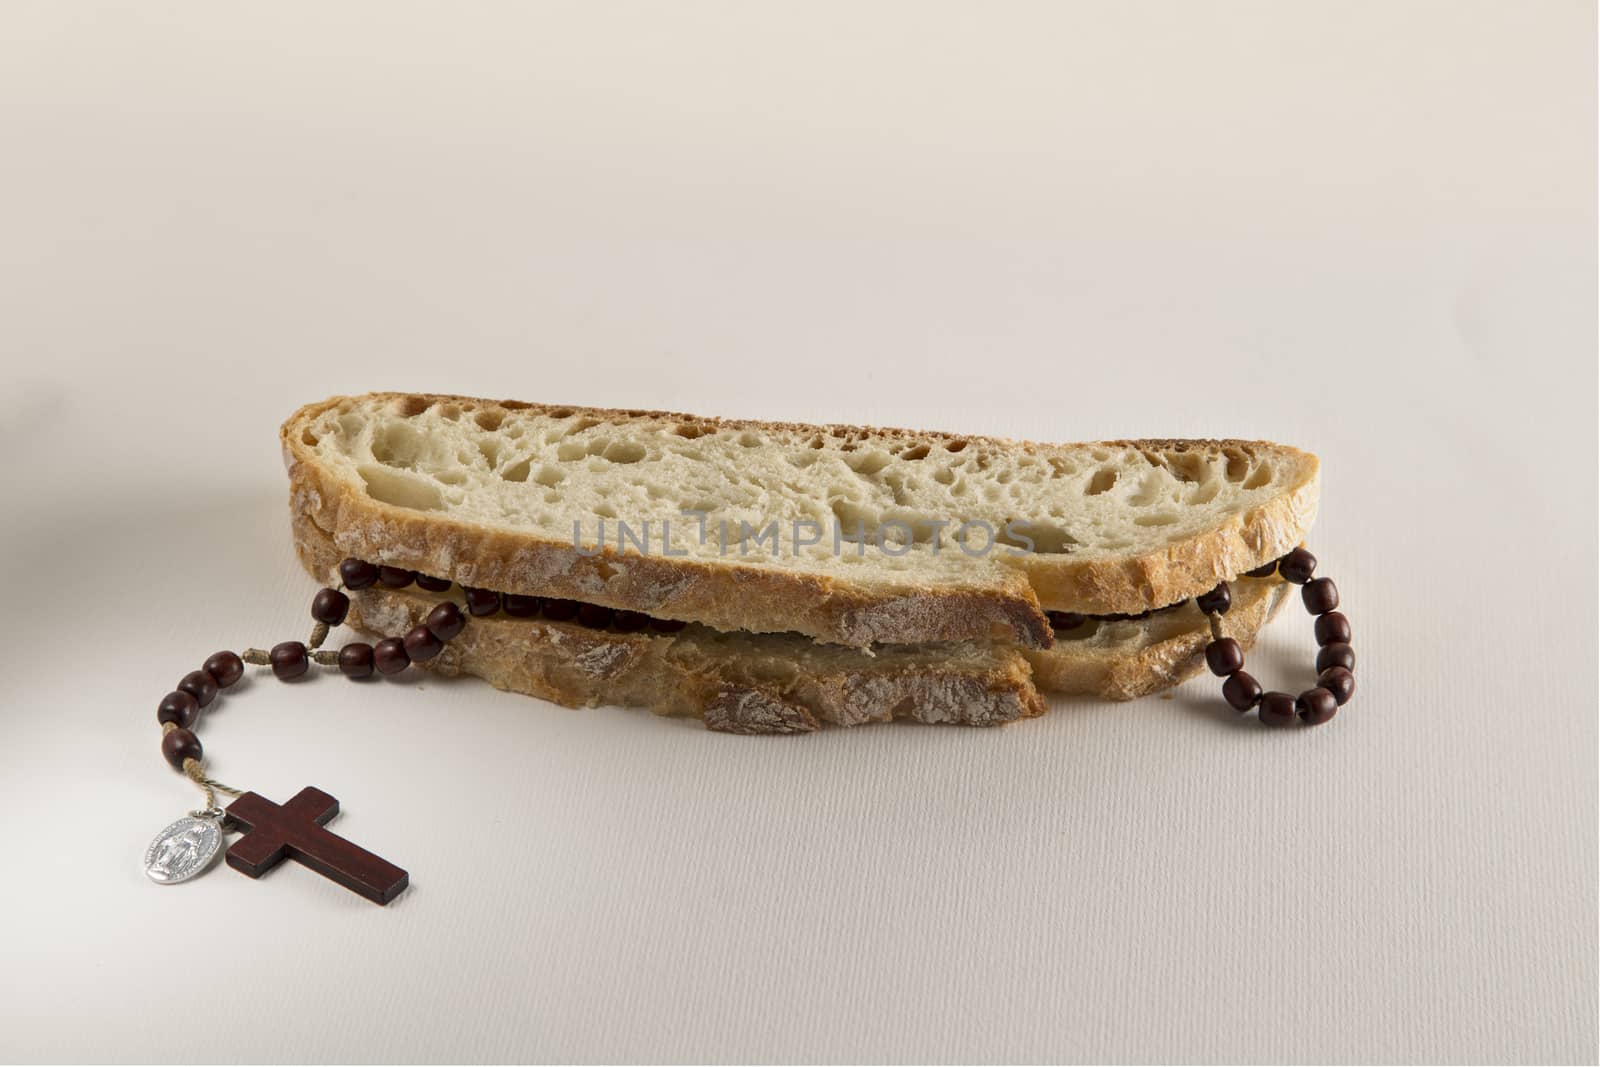 Italian bread and Holy Rosary beads necklace